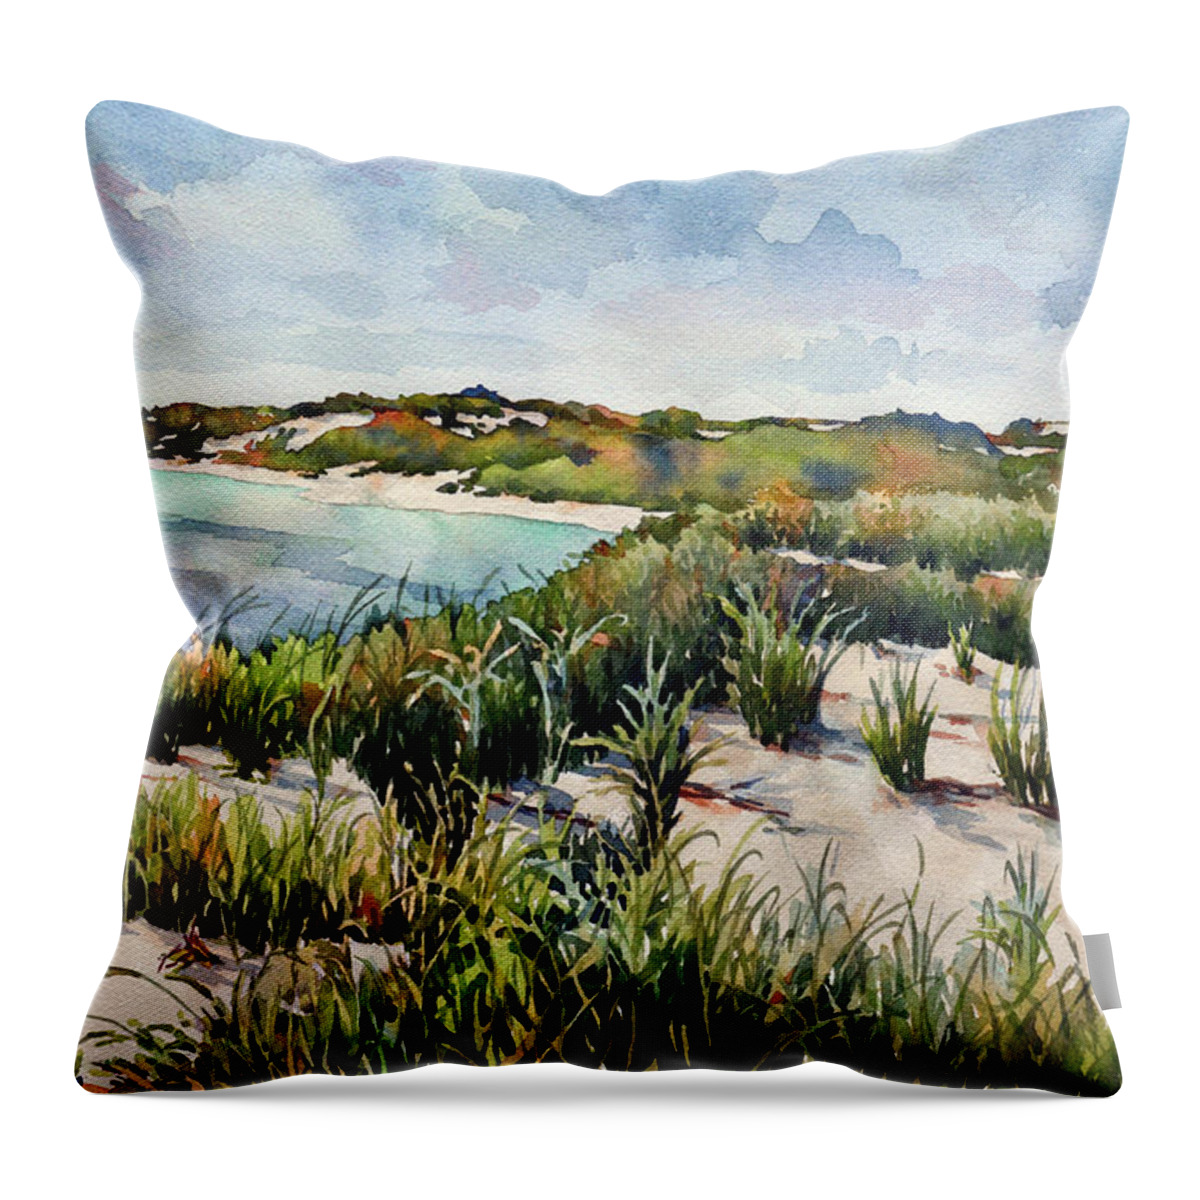 #delawarebeaches #beach Throw Pillow featuring the painting Henlopen Dunes by Mick Williams